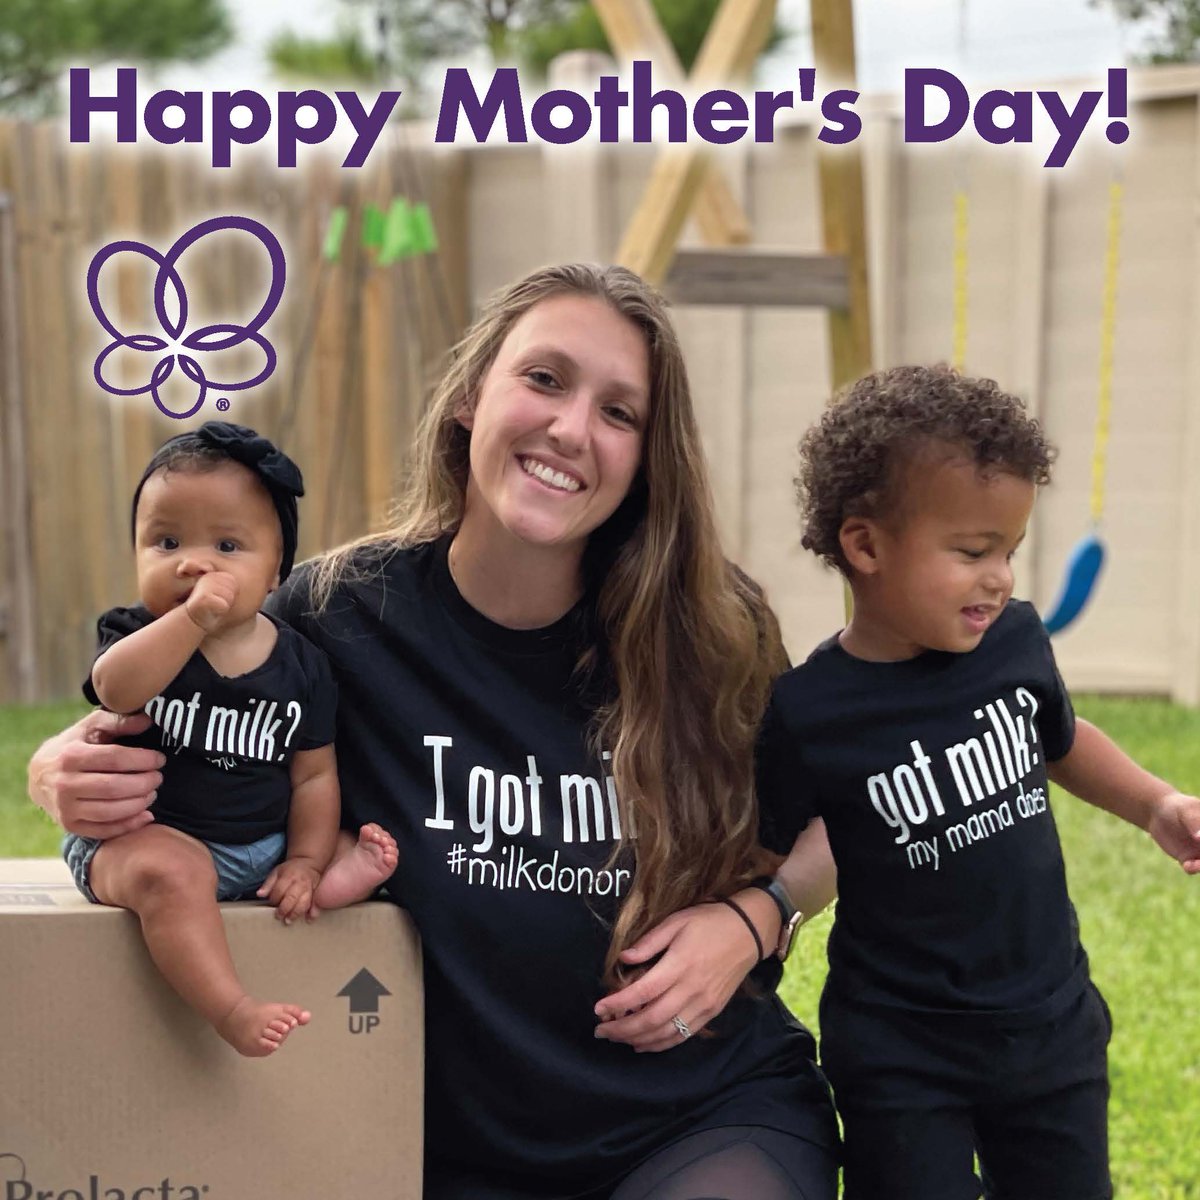 To all the incredible moms out there, thank you for your love, strength, and nurturing spirit. Your dedication to providing the best for your baby inspires us every day. Here's to celebrating you today and always! #MothersDay #CelebrateMom #ProlactaLove